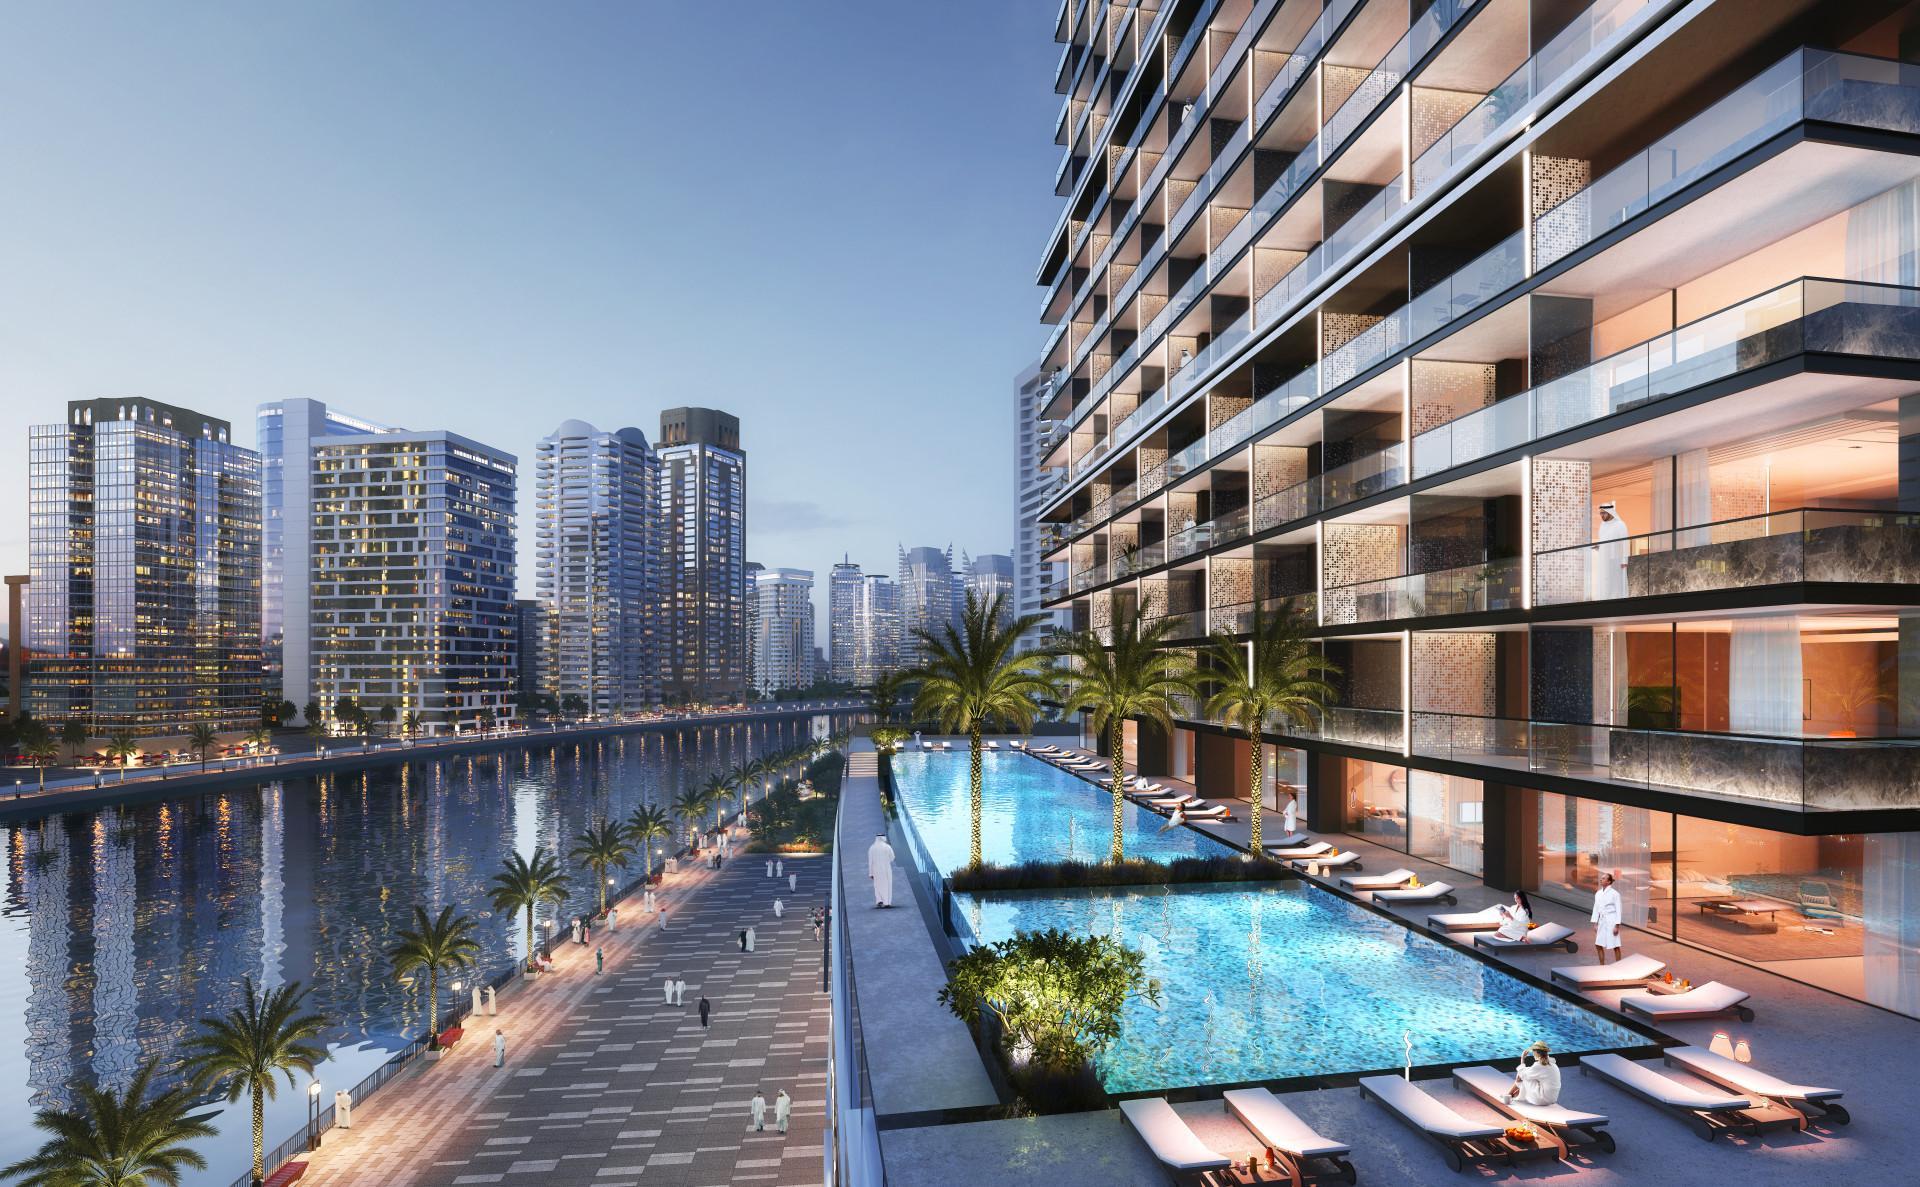 Gallery Trillionaire Residences